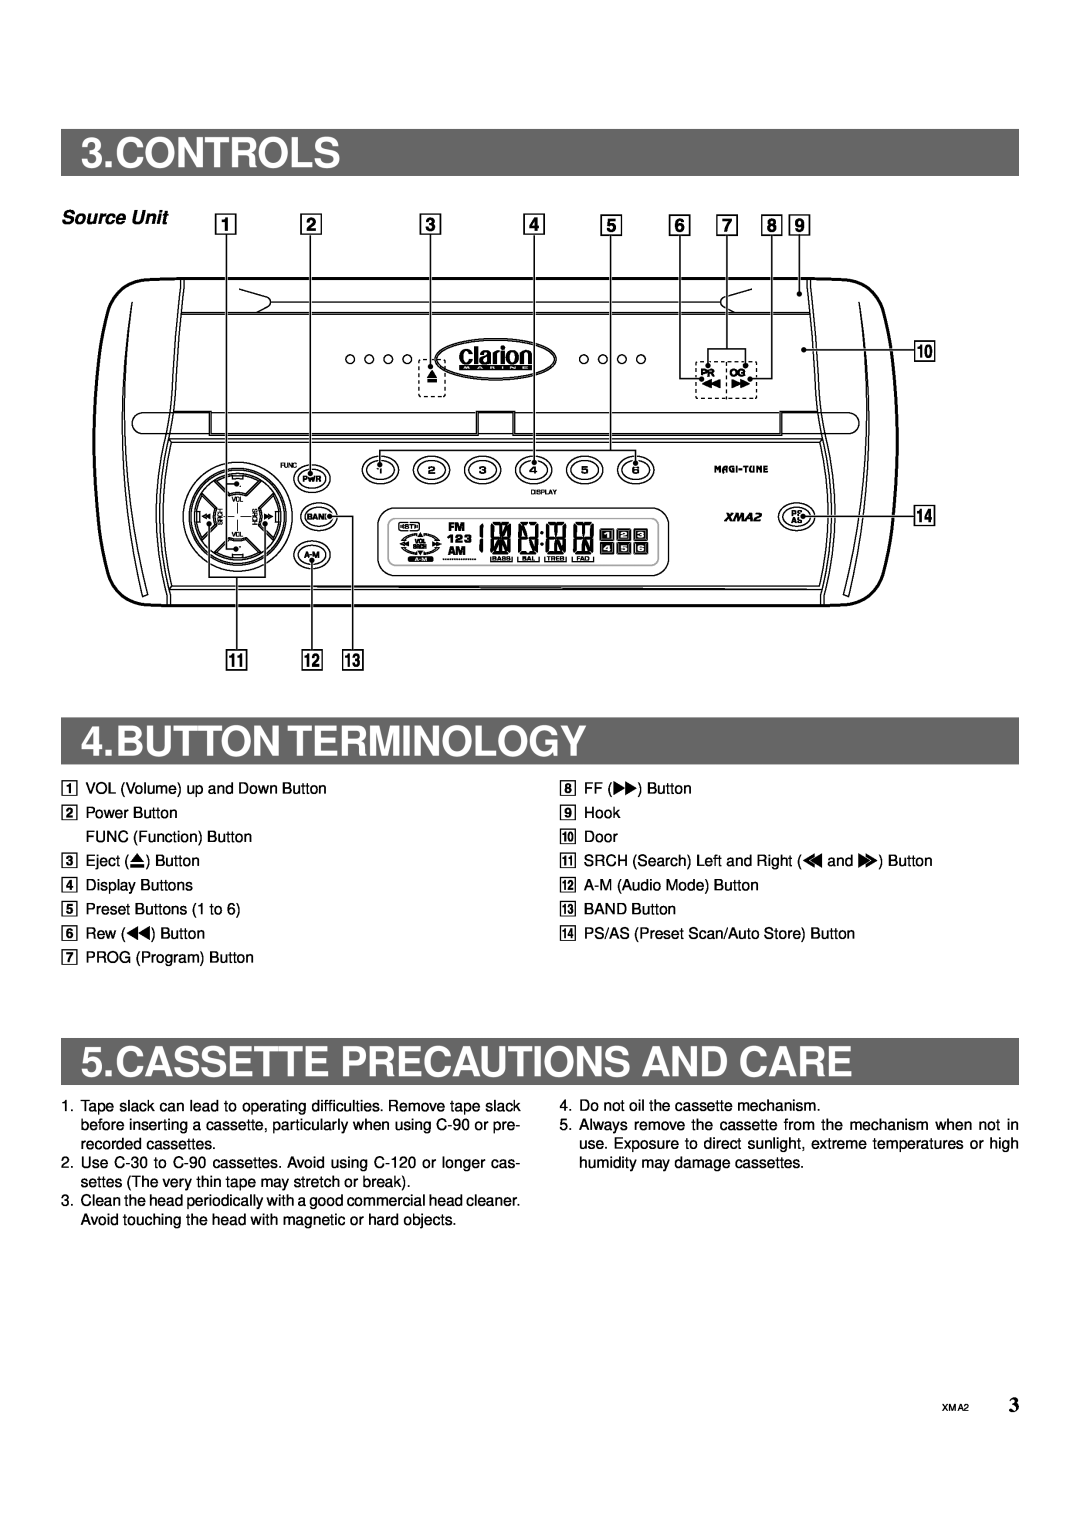 Clarion XMA2 owner manual Controls, Button Terminology, Cassette Precautions And Care, Source Unit 